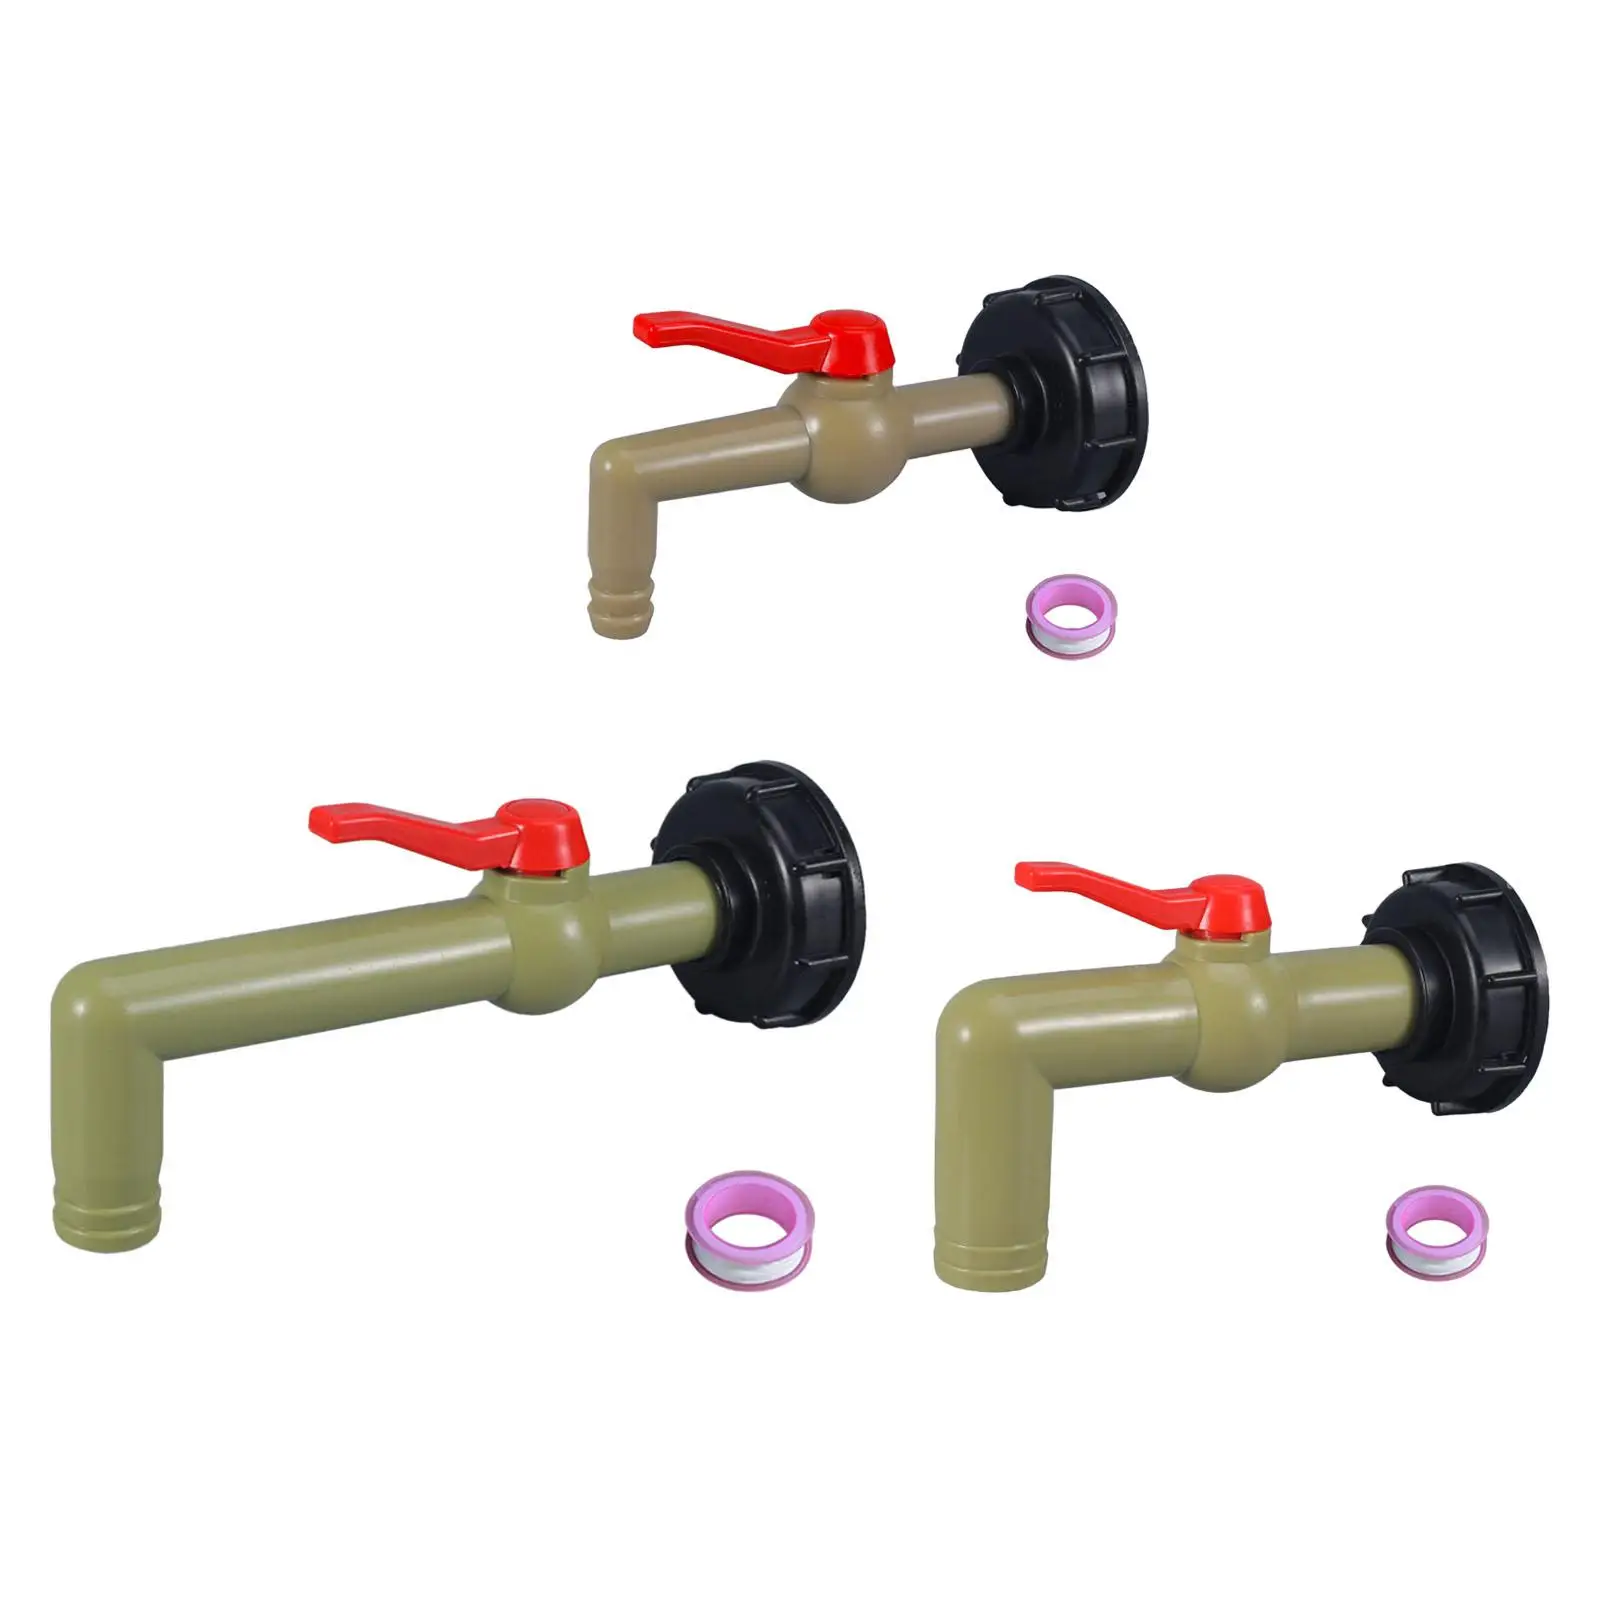 IBC Tank Adapter Coarse Thread Quick Connect Leakproof Water Outlet Connector Valve Fitting for 1000L Barrel Replacement Parts